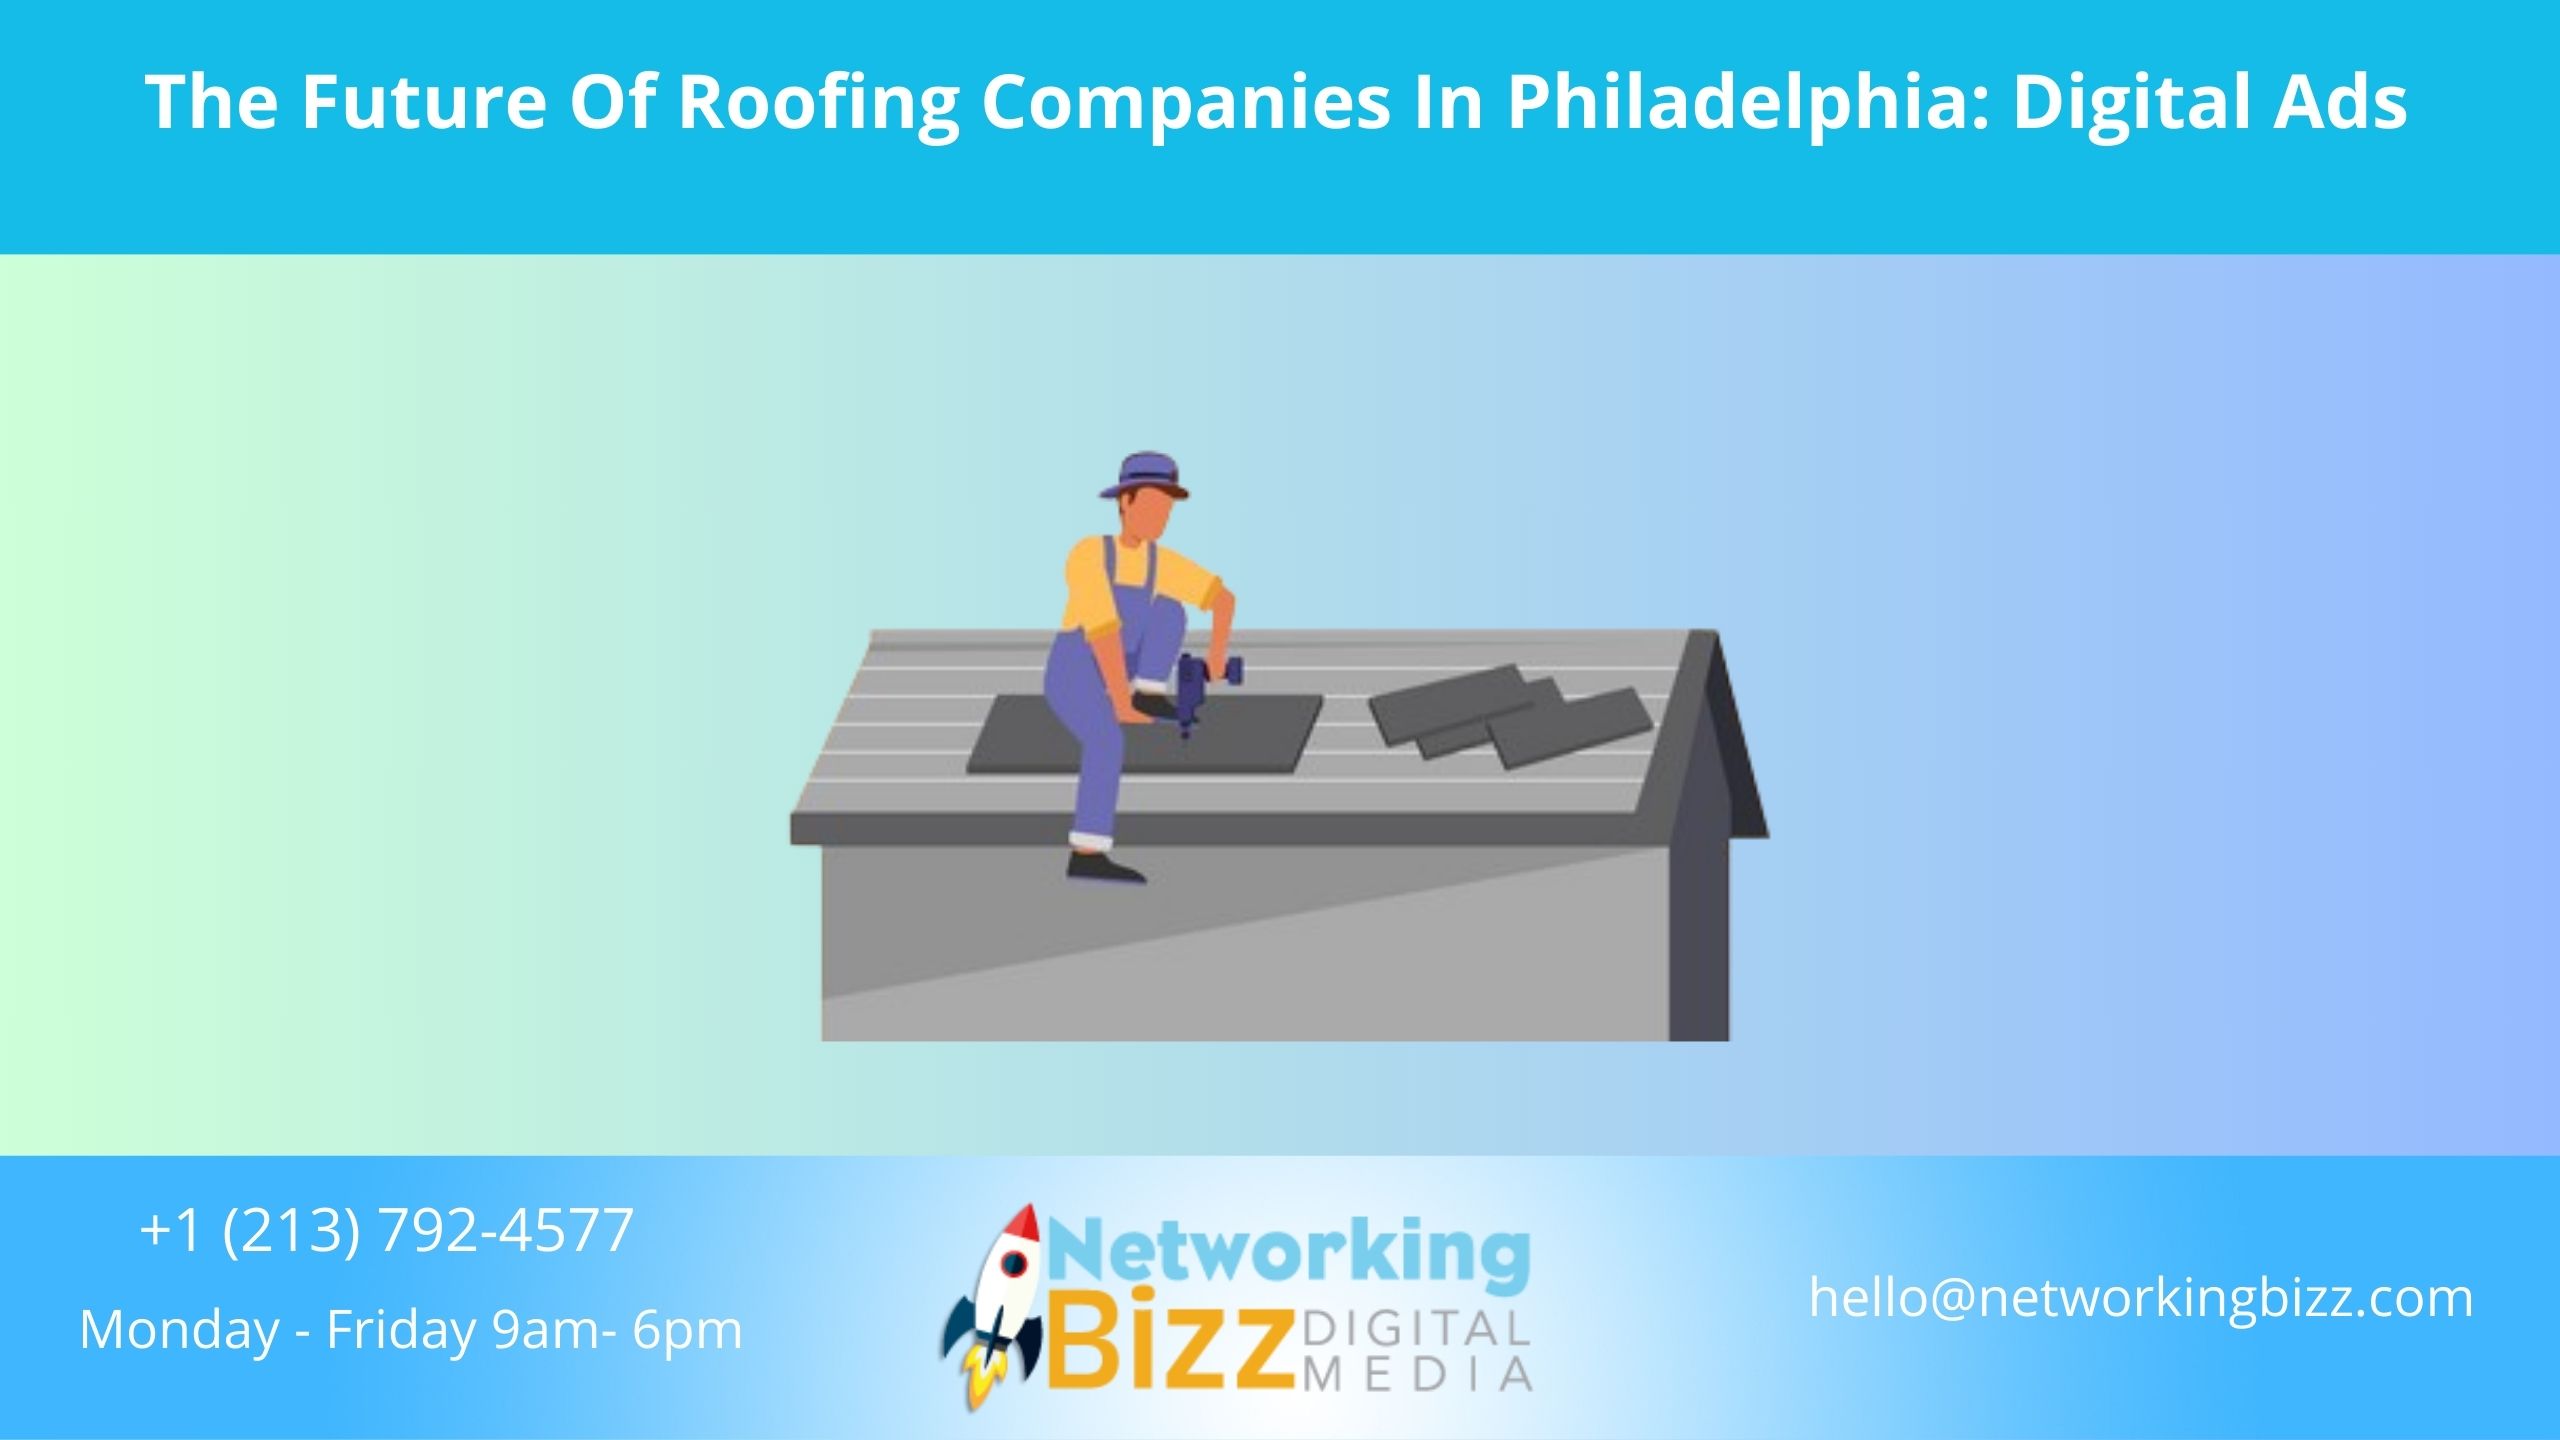 The Future Of Roofing Companies In Philadelphia: Digital Ads